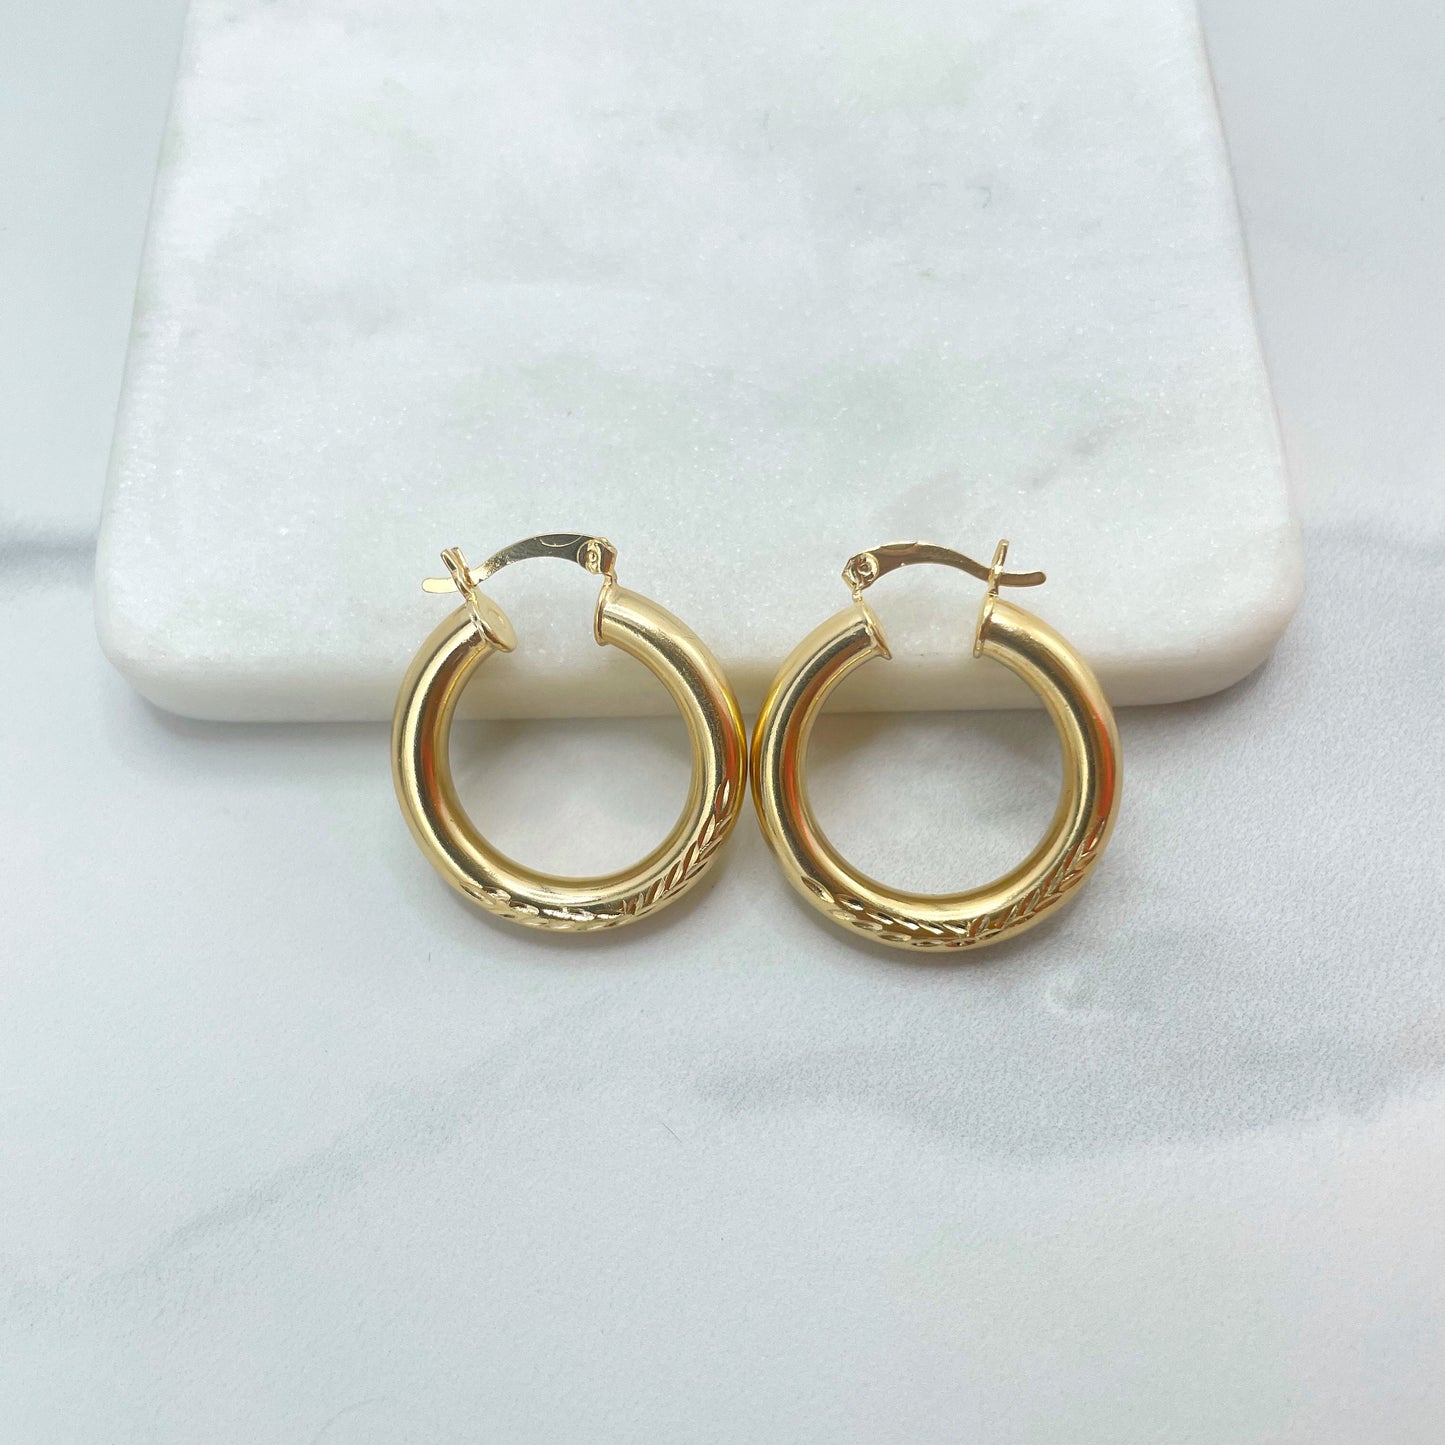 18k Gold Filled 30mm or 60mm Texturized Hoops Earrings Wholesale Jewelry Making Supplies